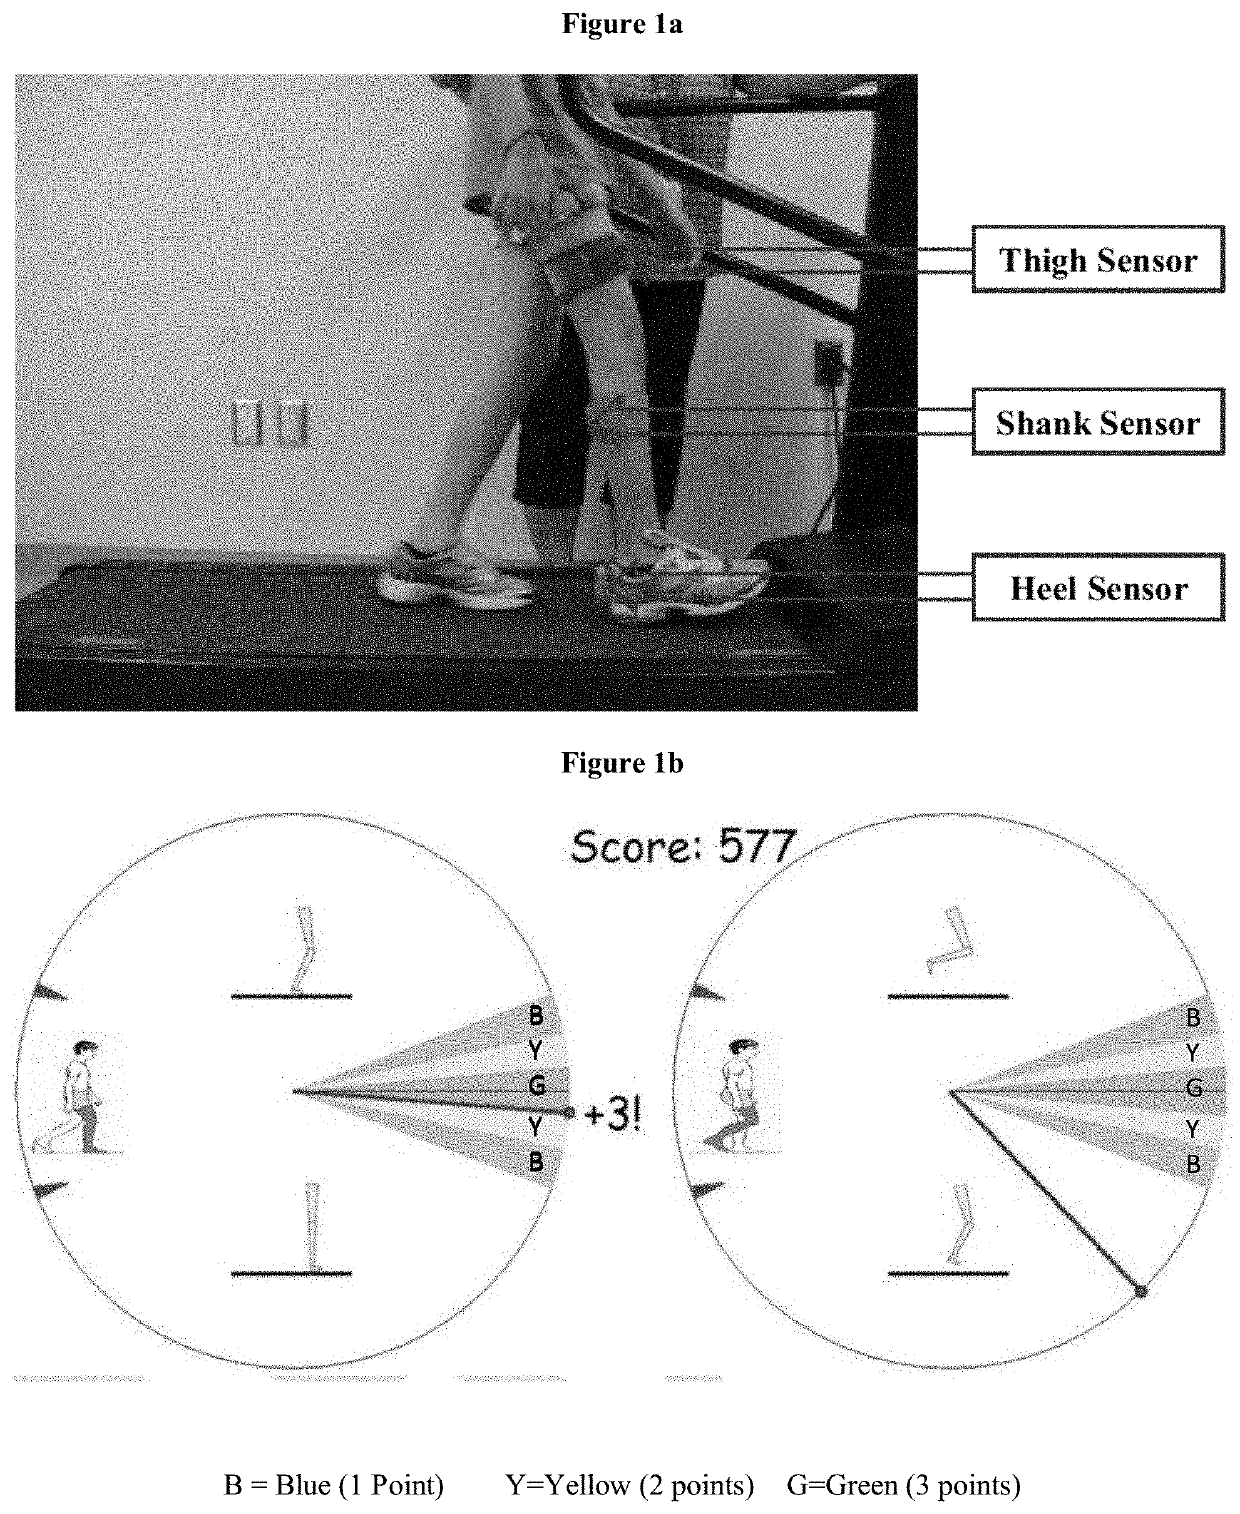 Feedback systems and methods for gait training for pediatric subjects afflicted with gait disorders